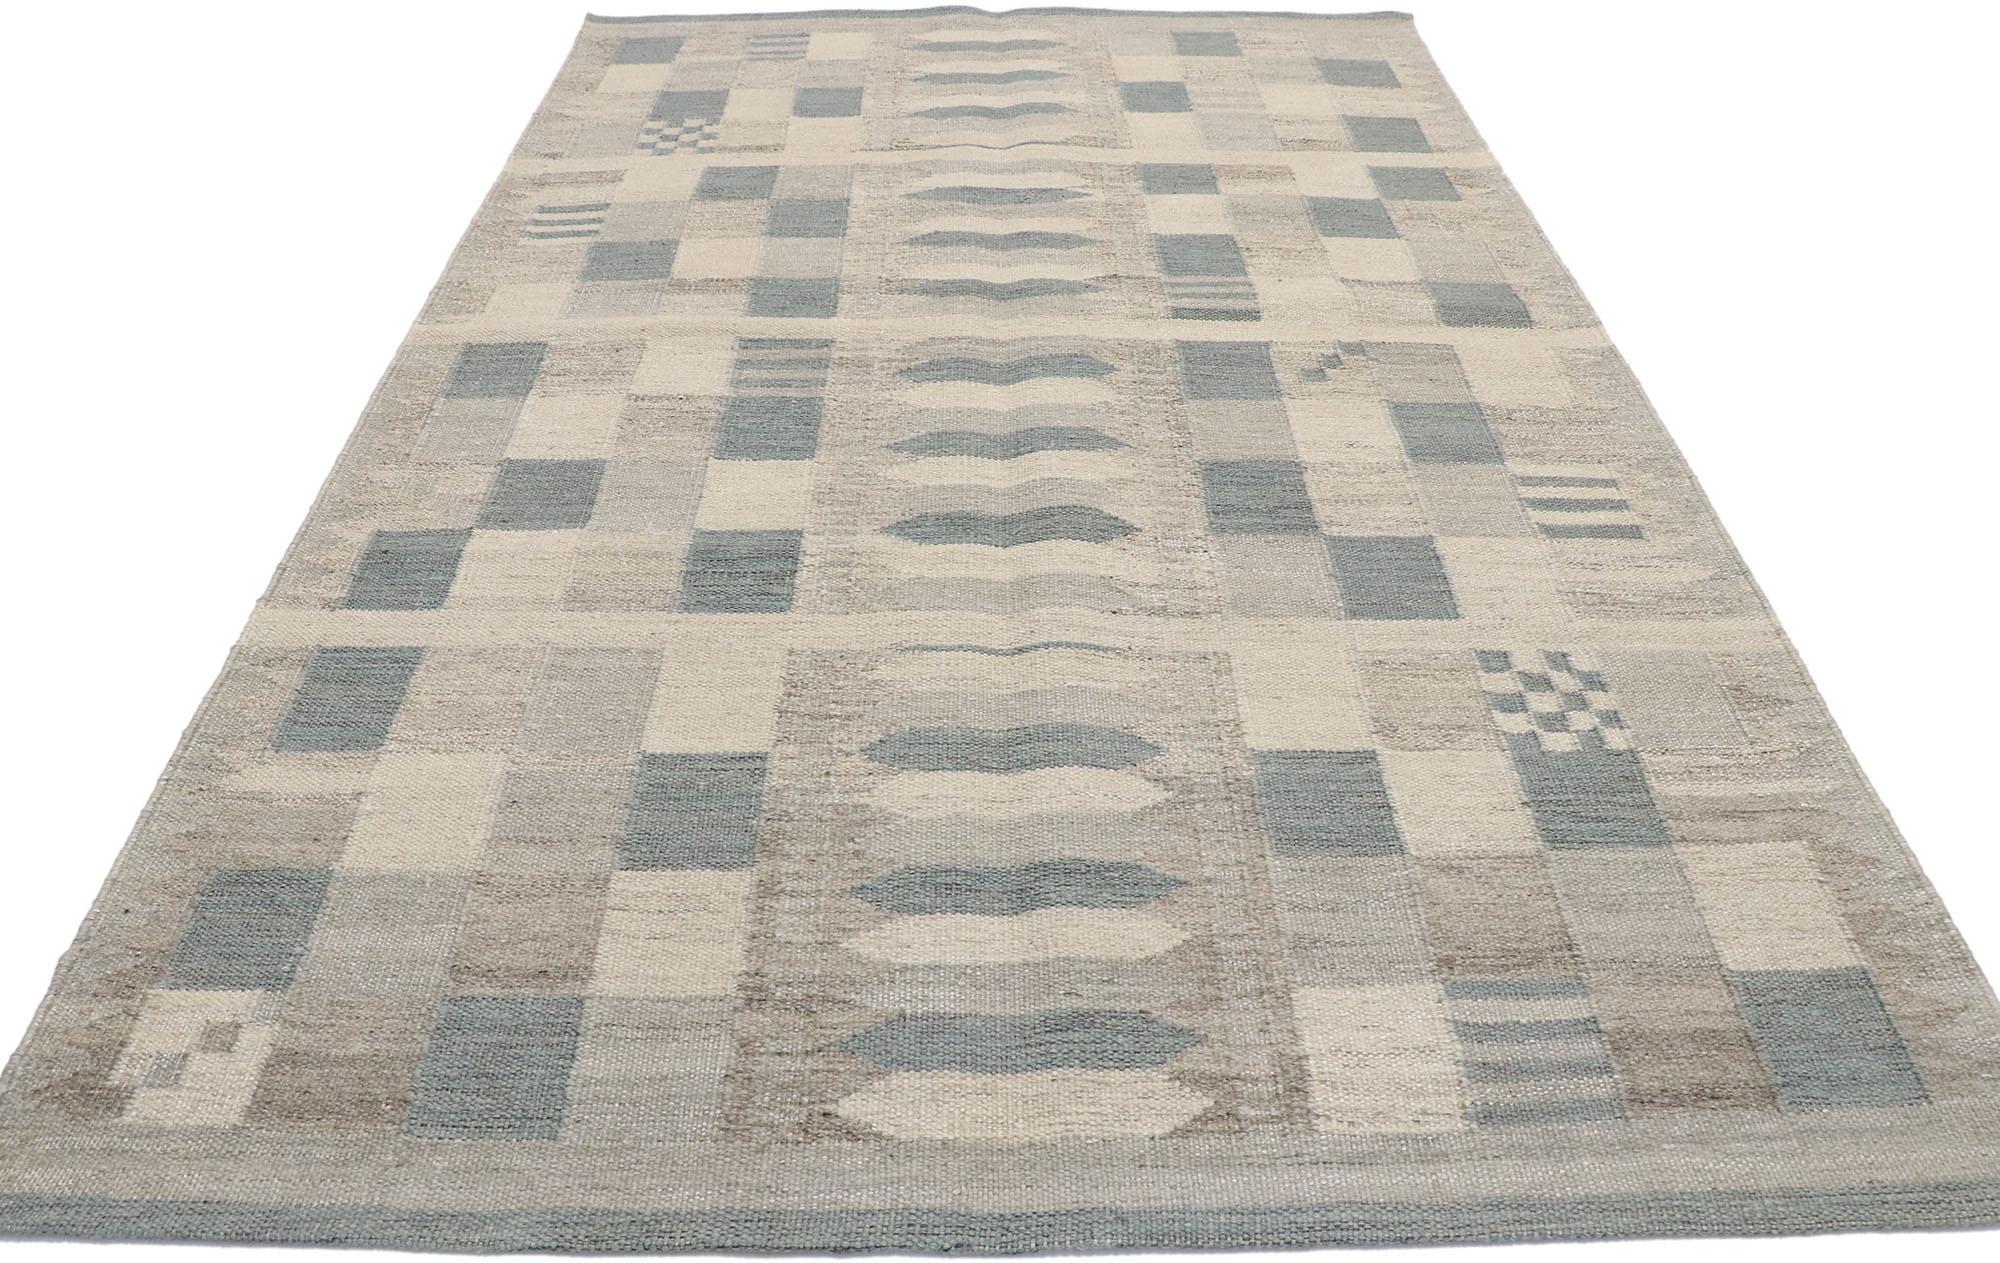 Hand-Woven New Contemporary Swedish Inspired Kilim Rug with Scandinavian Modern Style For Sale